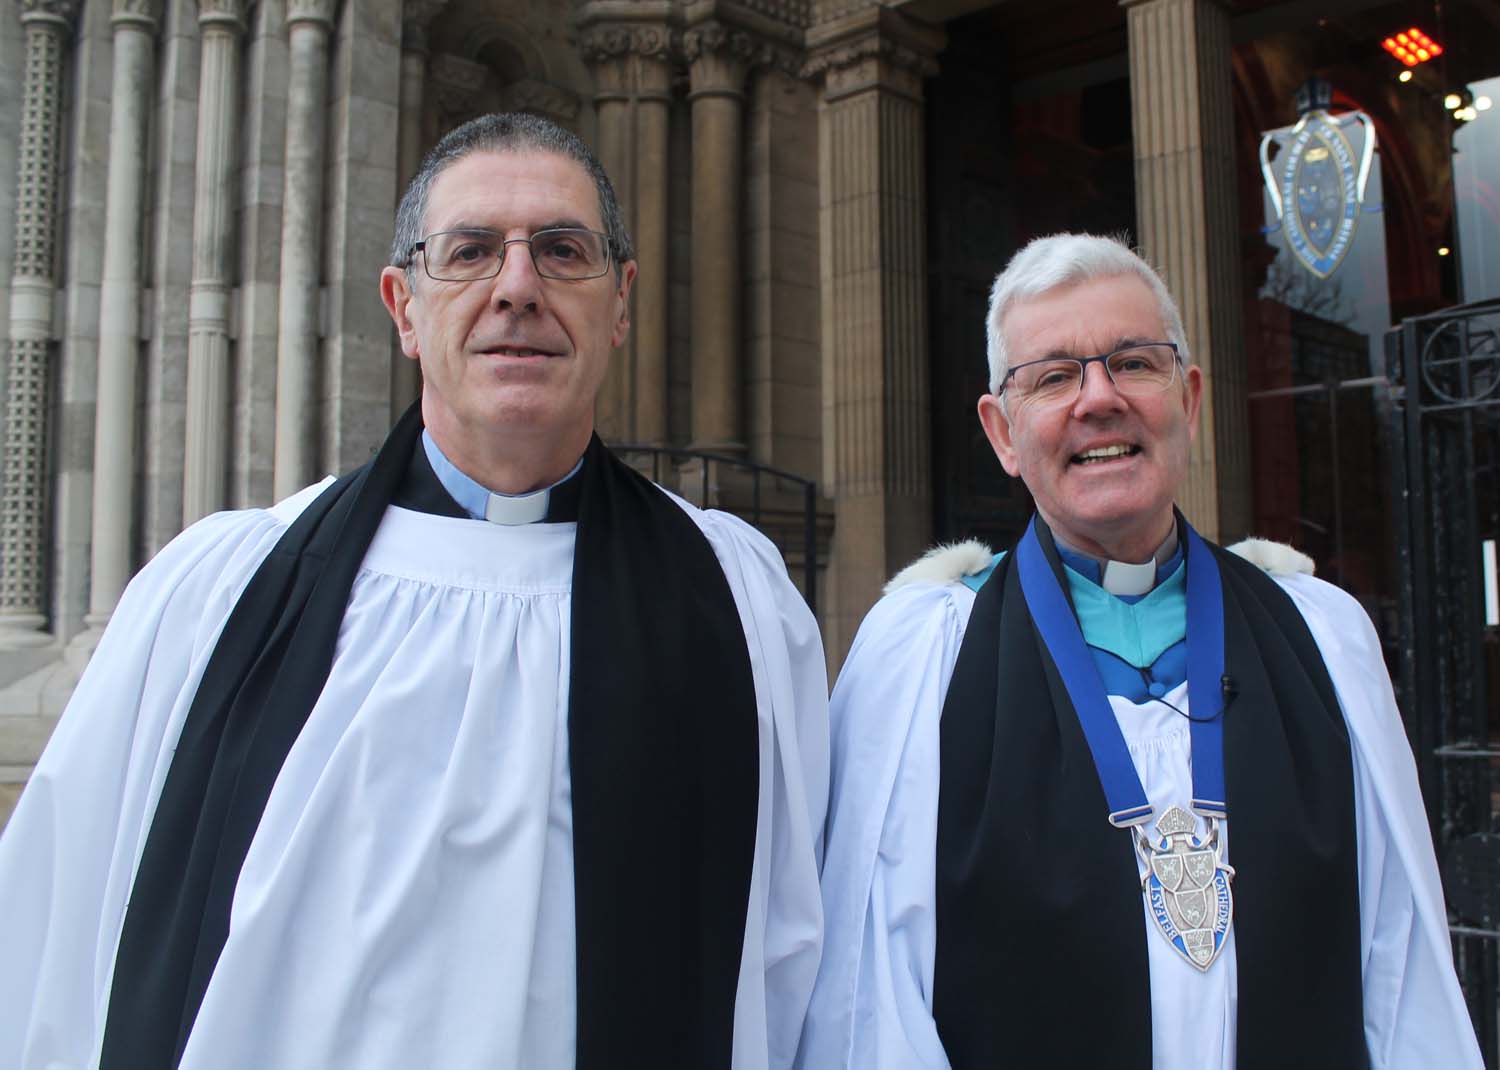 The Rev Mark Reid, Mission to Seafarers Chaplain, and the Dean of Belfast, the Very Rev Stephen Forde, led the service to commemorate the 70th anniversary of the sinking of the MV Princess Victoria.